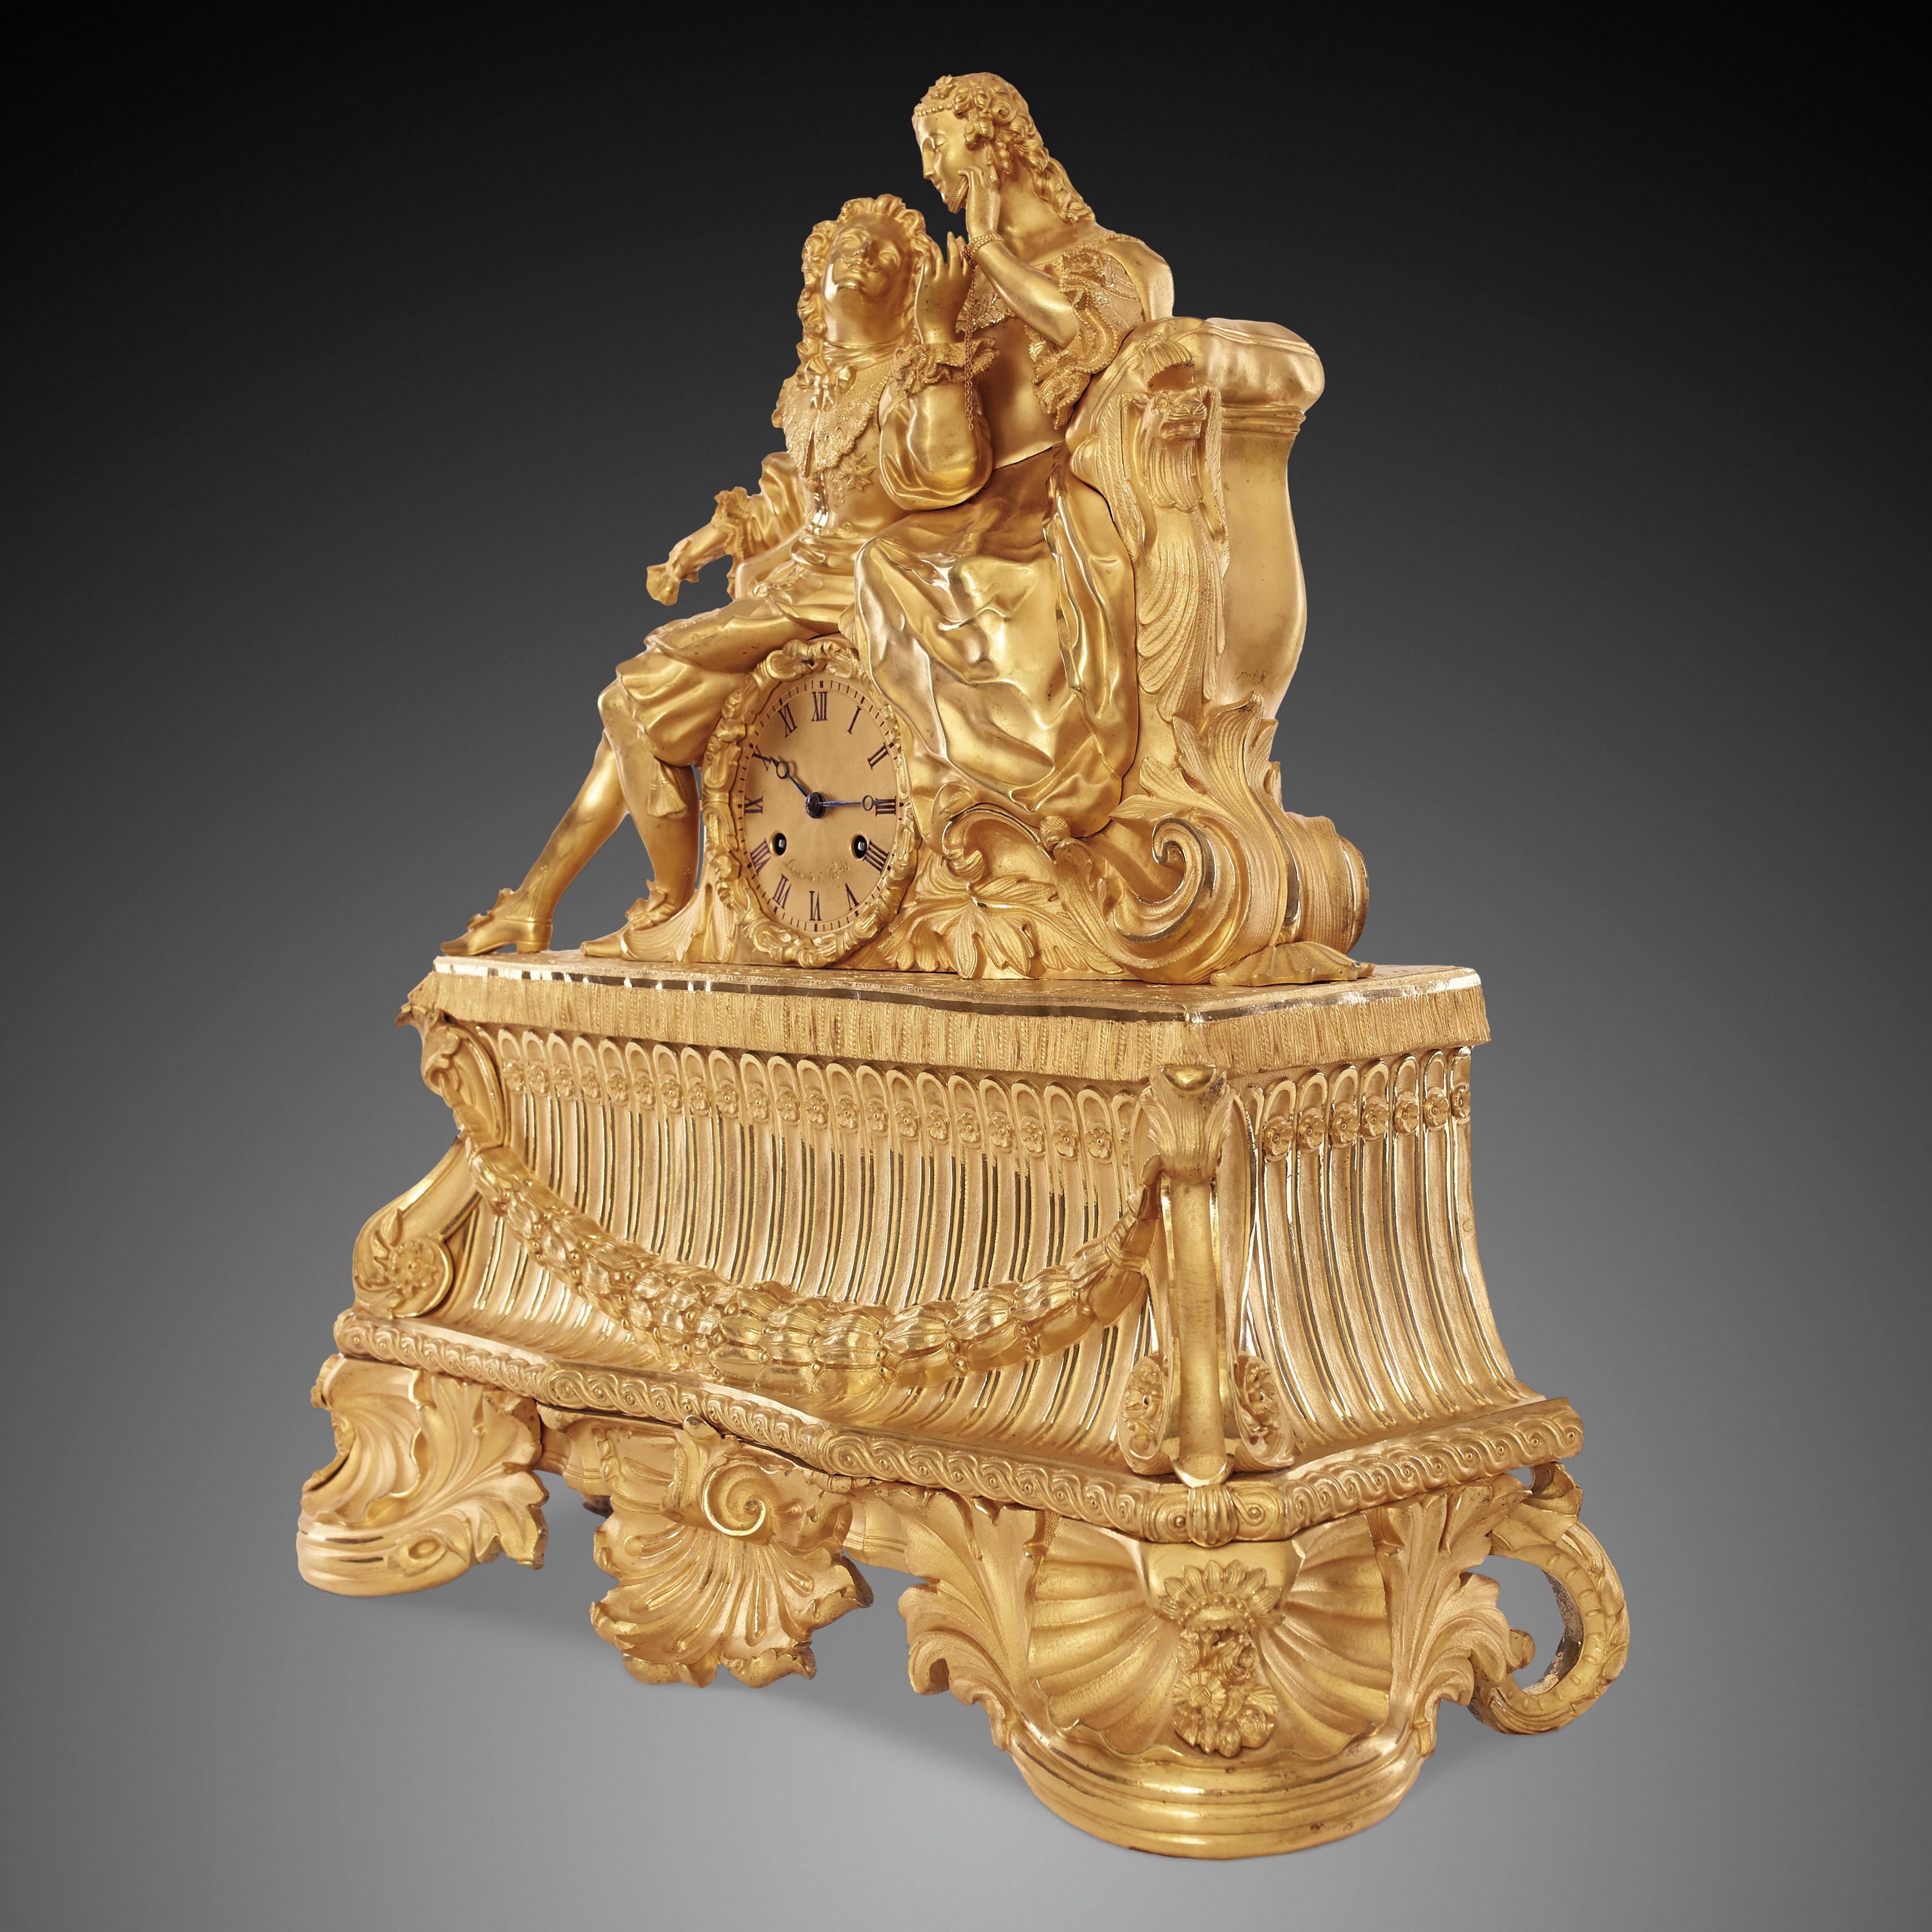 Antique French Louis Philippe style gilded bronze mantel clock from early 19th century, signed on the dial Lepaute à Paris. This clock is uniquely beautiful in that it combines true beauty of the artistry with conventional, classical, figurine